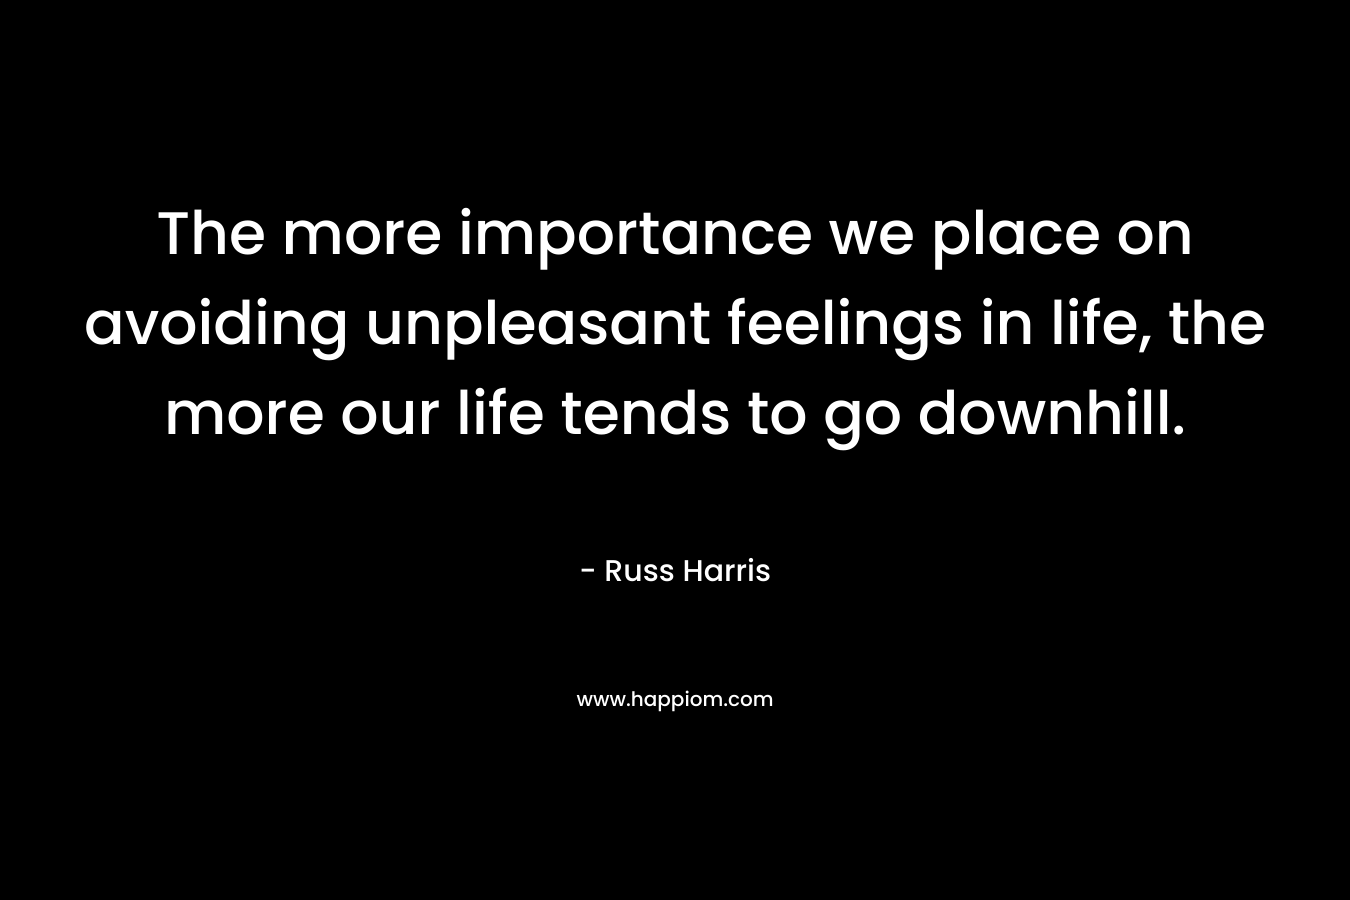 The more importance we place on avoiding unpleasant feelings in life, the more our life tends to go downhill. – Russ Harris